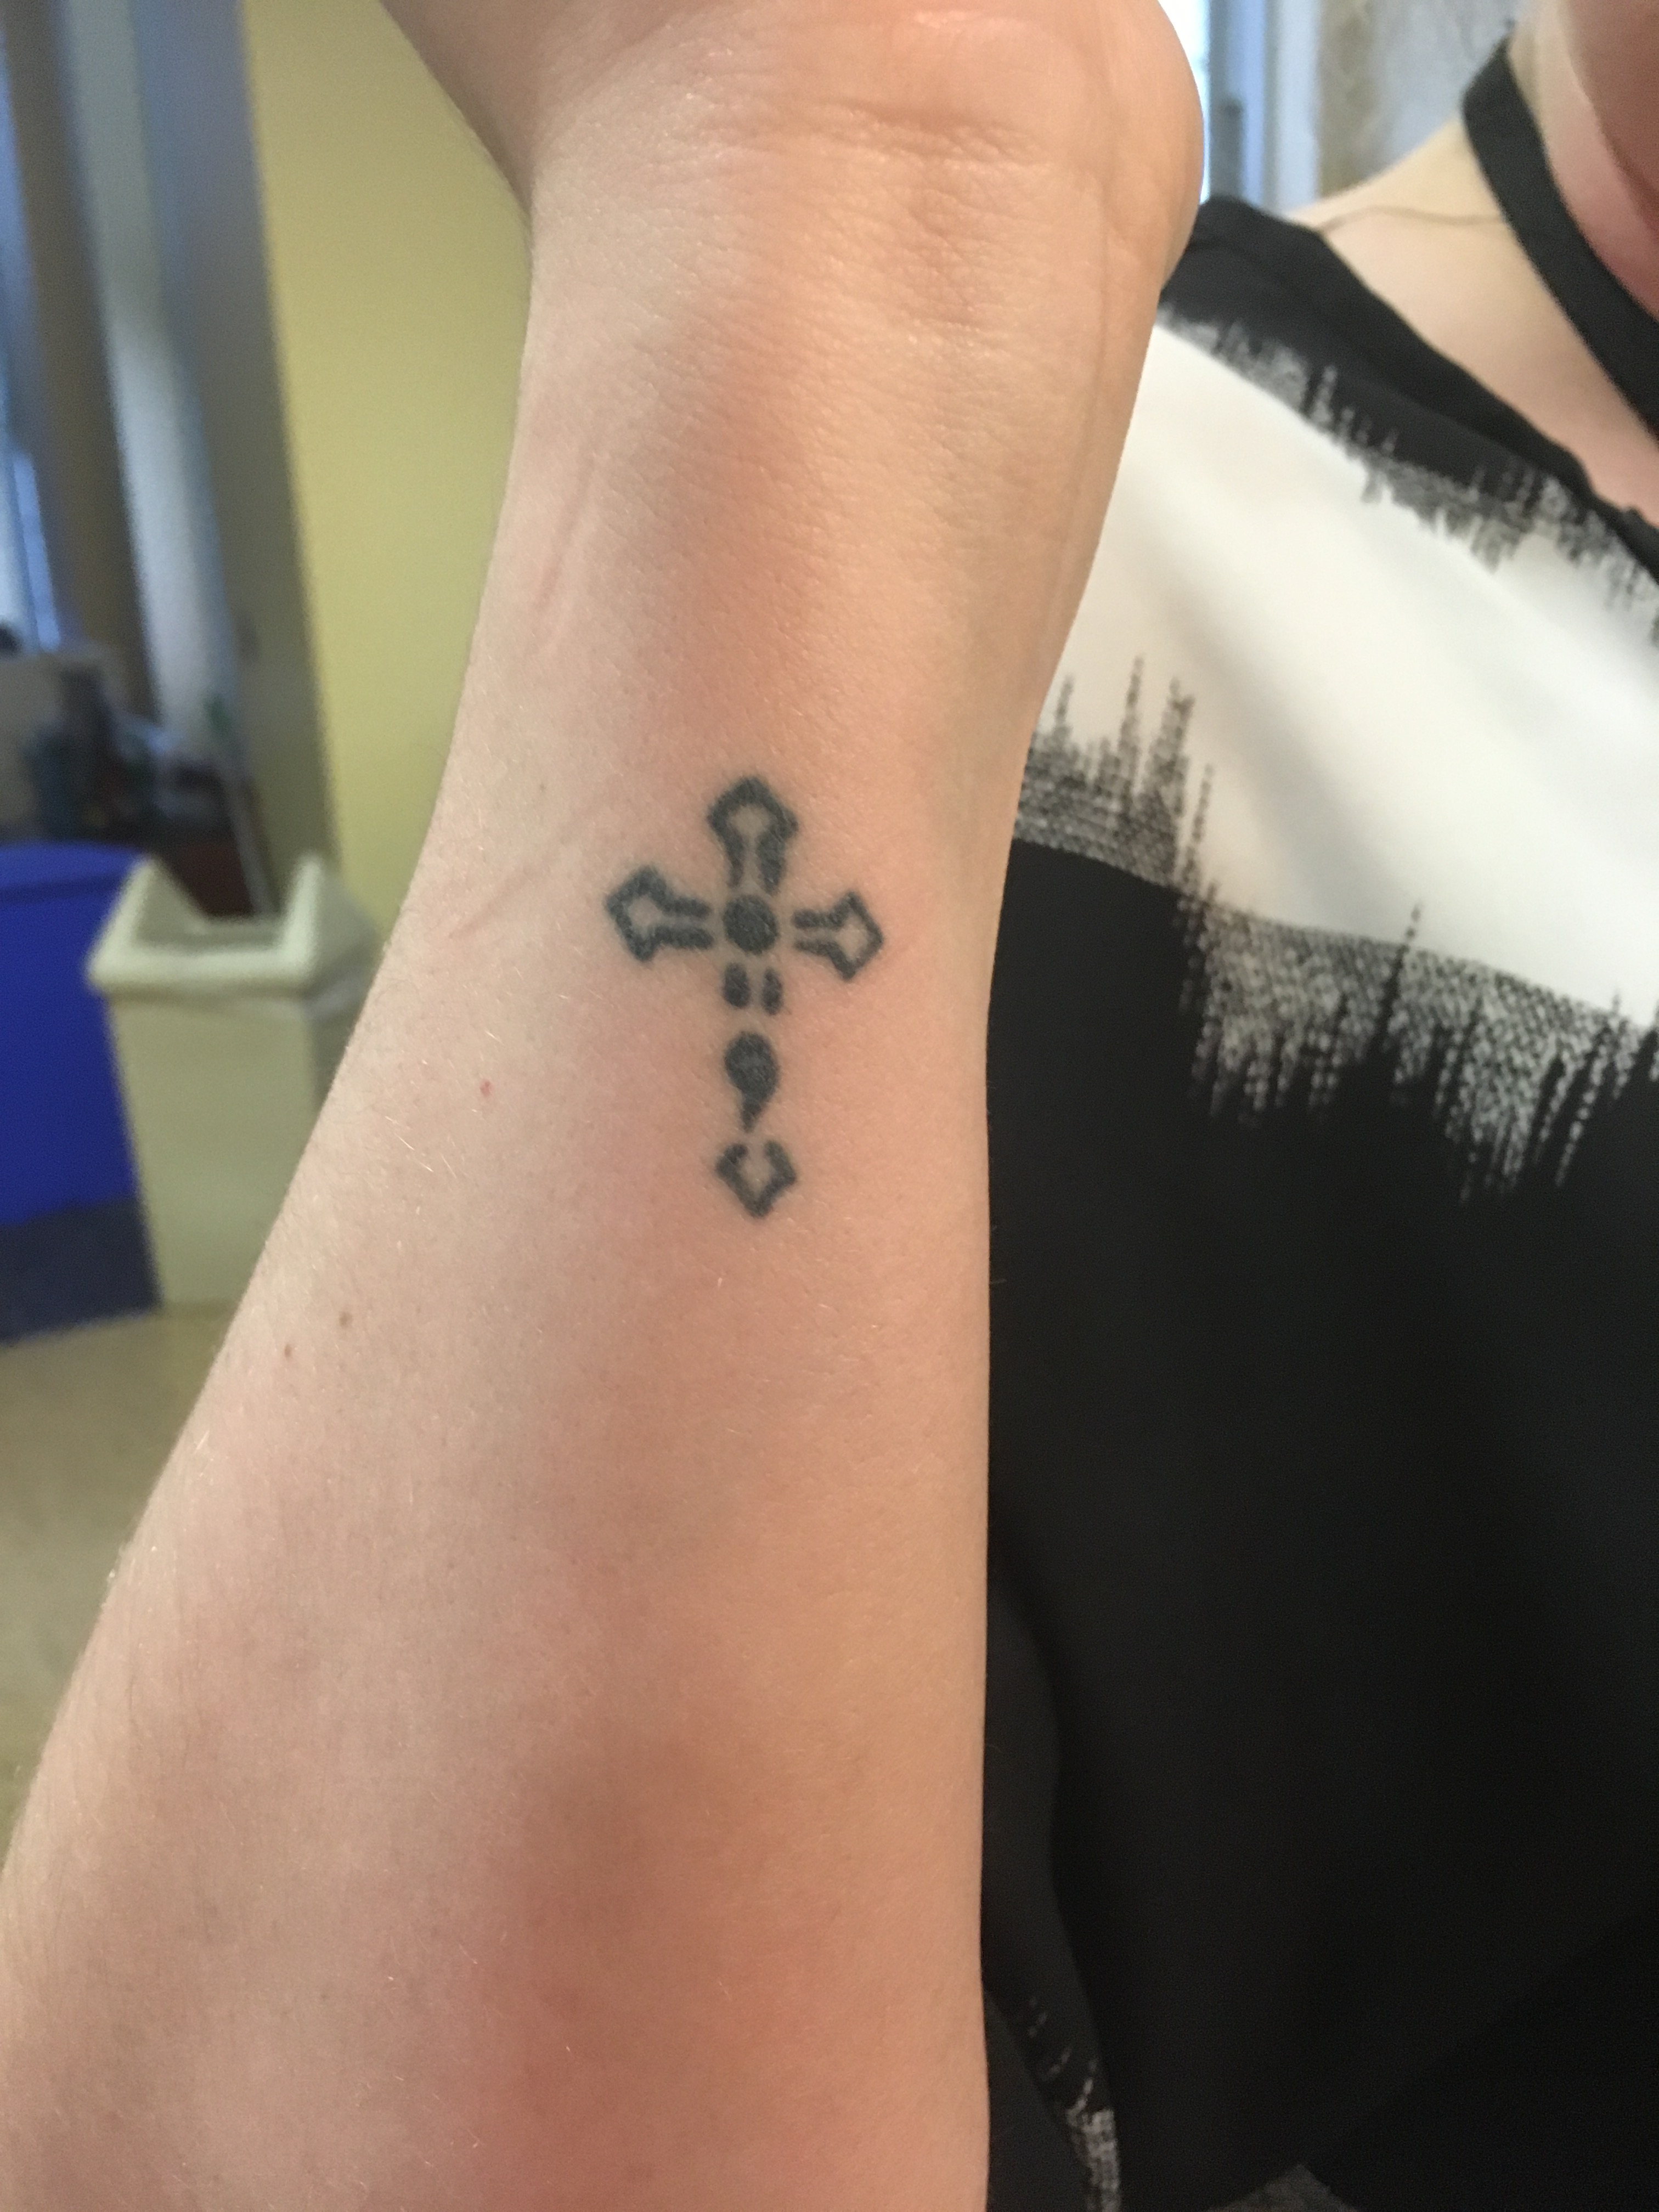 The Semicolon Cross tattoo and Michael Card's meditations on depression,  suicidal ideation, and hope. | Russell's Inspiration Daybook